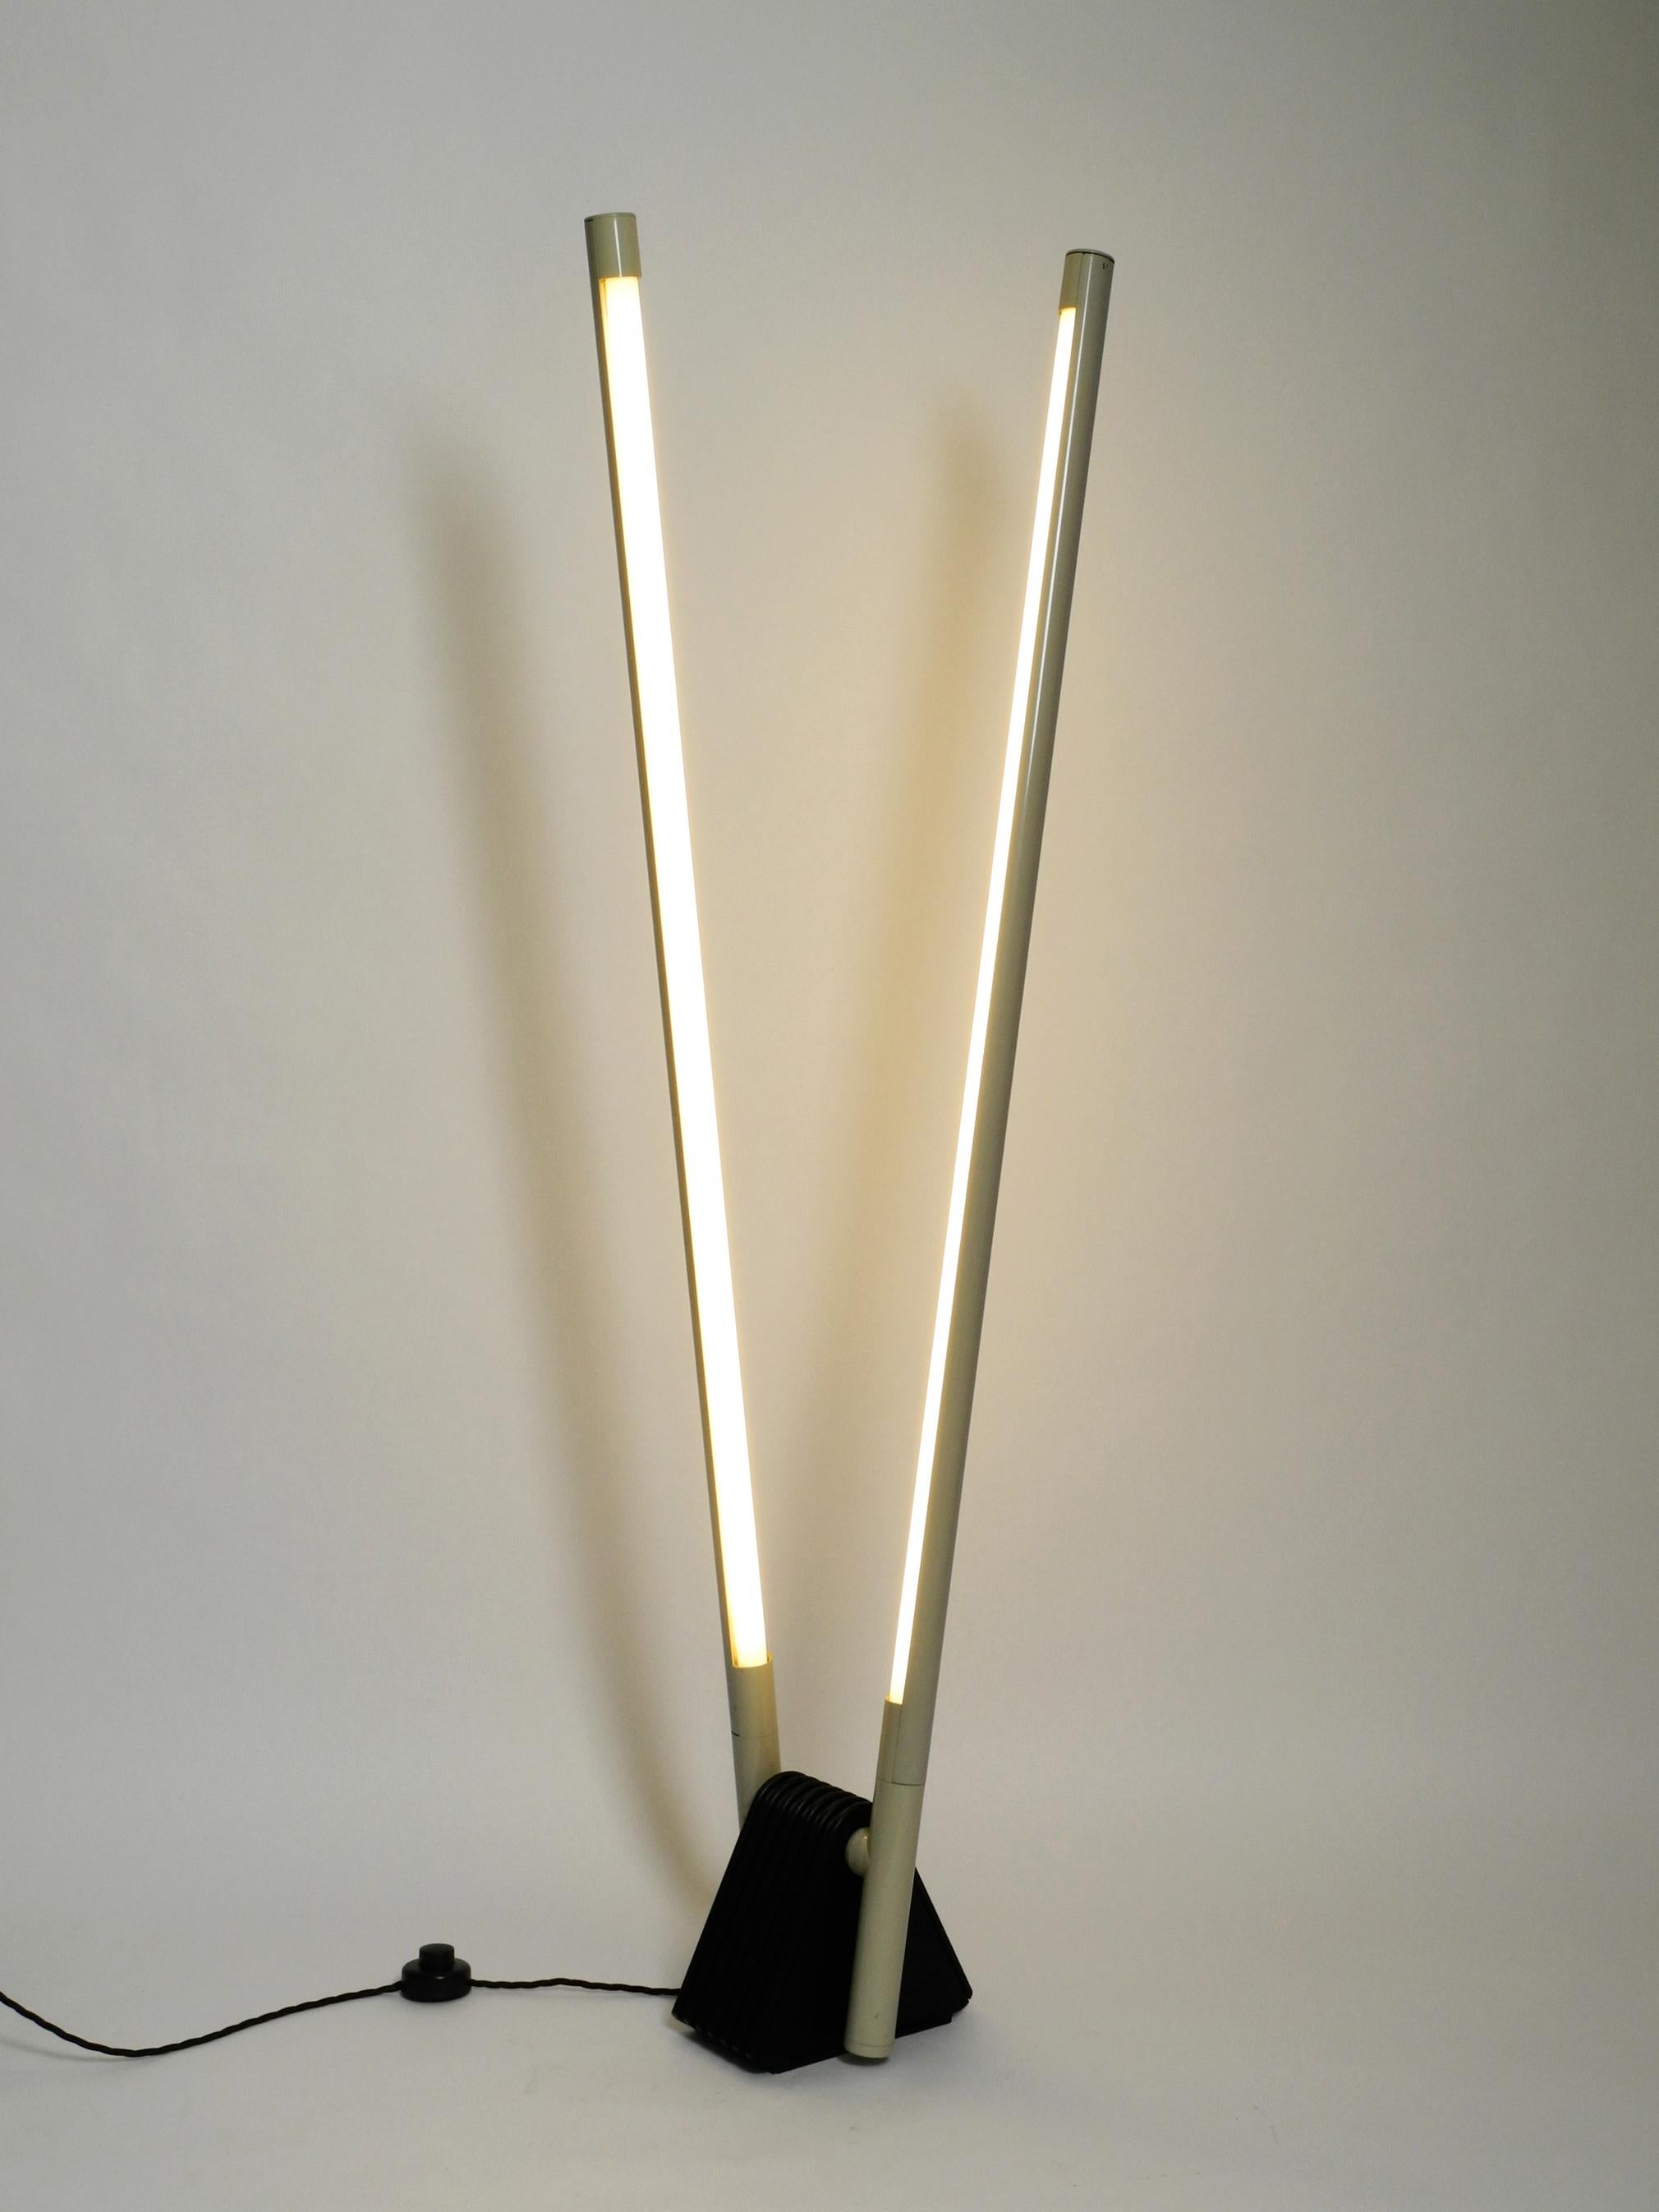 Systema Flu double neon tube floor lamp by Rodolfo Bonetto for LUCI from 1981.
Great minimalistic Postmodern design. Made in Italy.
Both reflectors can be rotated and tilted steplessly.
Fully functional and rewired with a new foot switch and